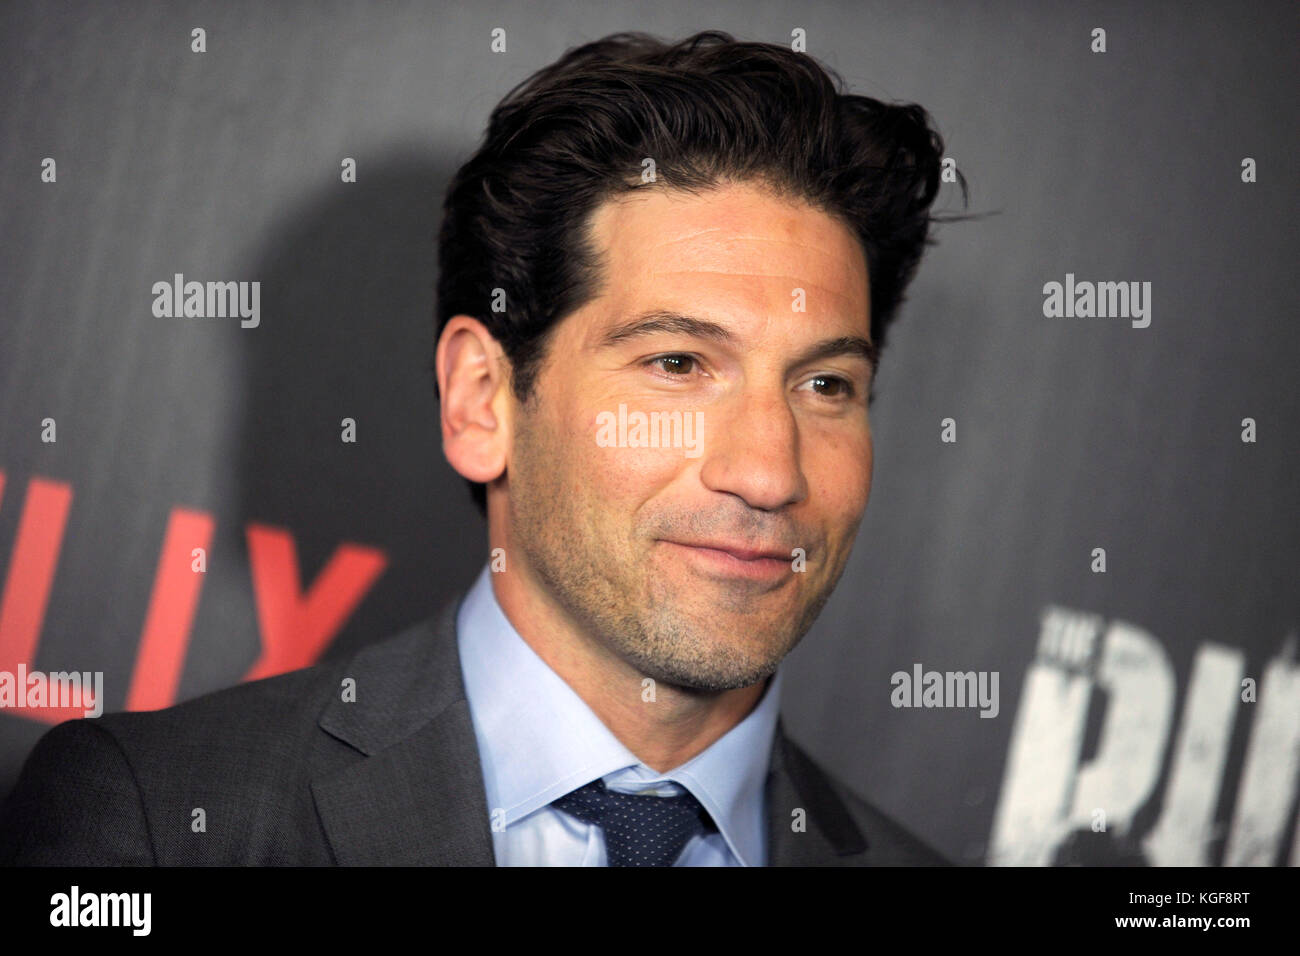 Jon Bernthal attends the Netfilx TV serious premiere of 'The Punisher' at AMC Loews on November 6, 2017 in New York City. Stock Photo